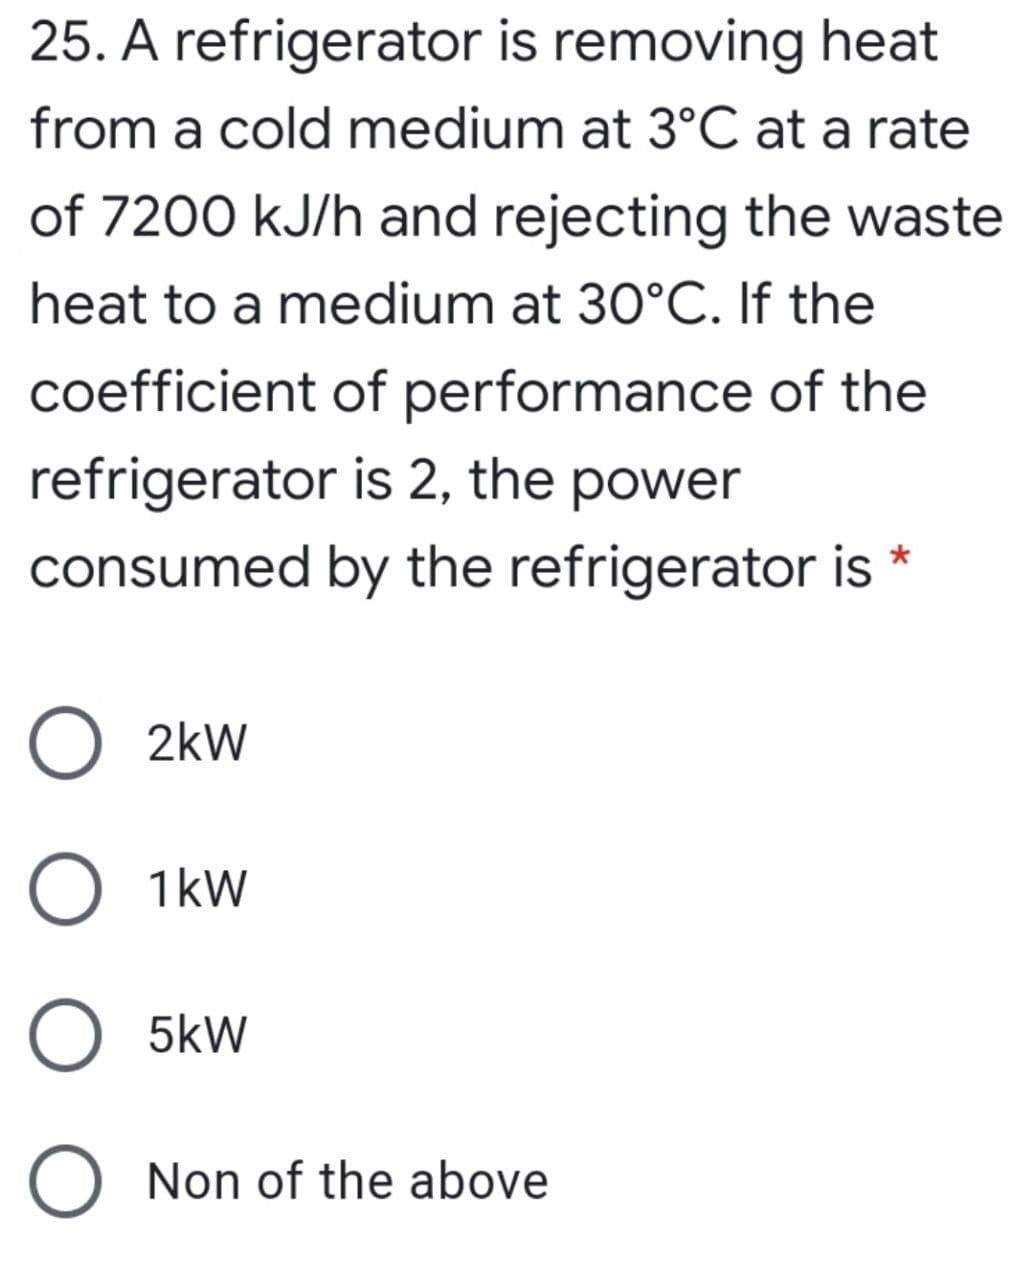 25. A refrigerator is removing heat
from a cold medium at 3°C at a rate
of 7200 kJ/h and rejecting the waste
heat to a medium at 30°C. If the
coefficient of performance of the
refrigerator is 2, the power
consumed by the refrigerator is
O 2kw
O 1kw
O 5kW
O Non of the above
